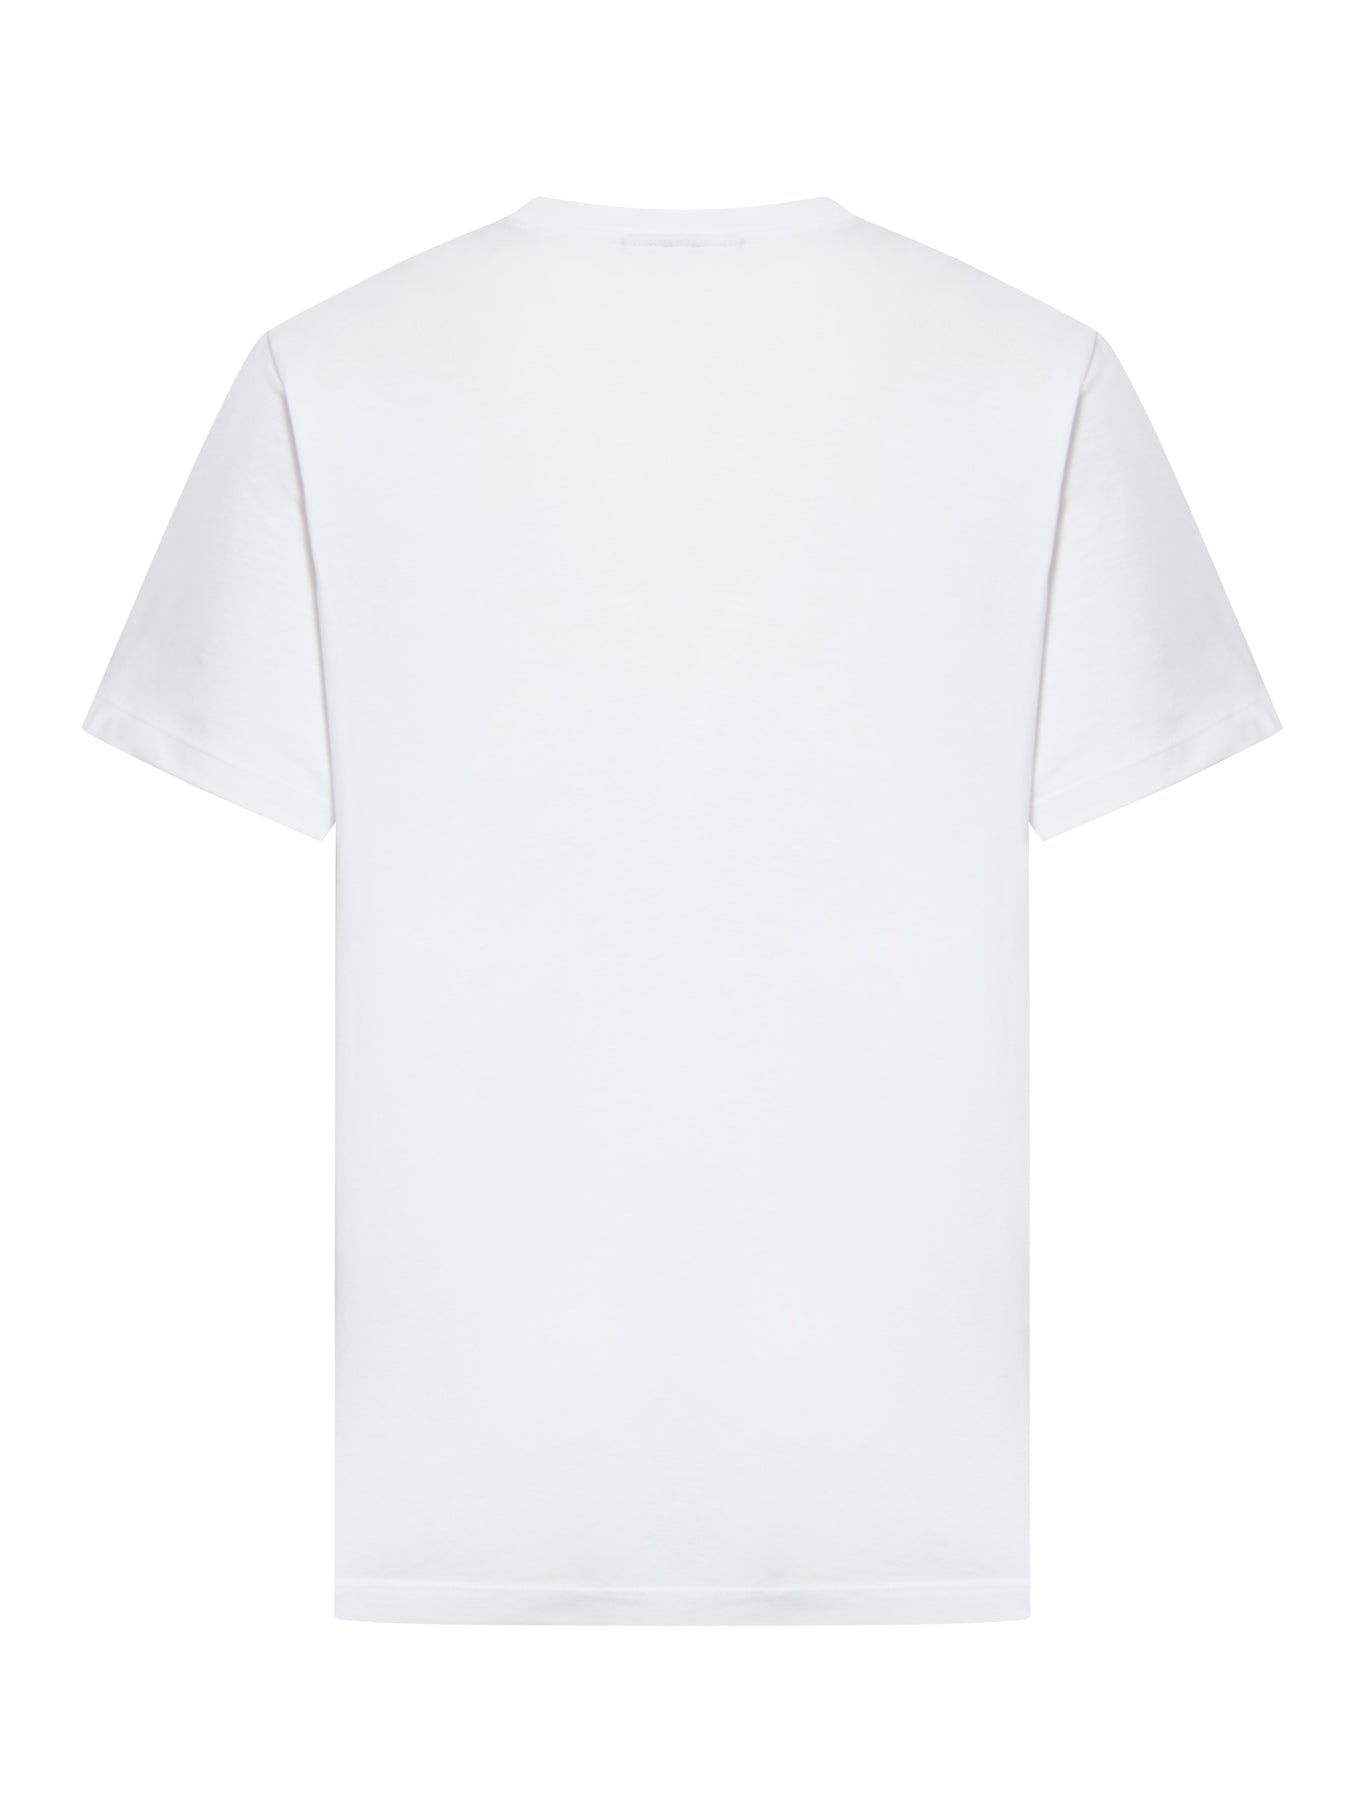 WHITE BASIC JERSEY CHERRY RELAXED T-SHIRT